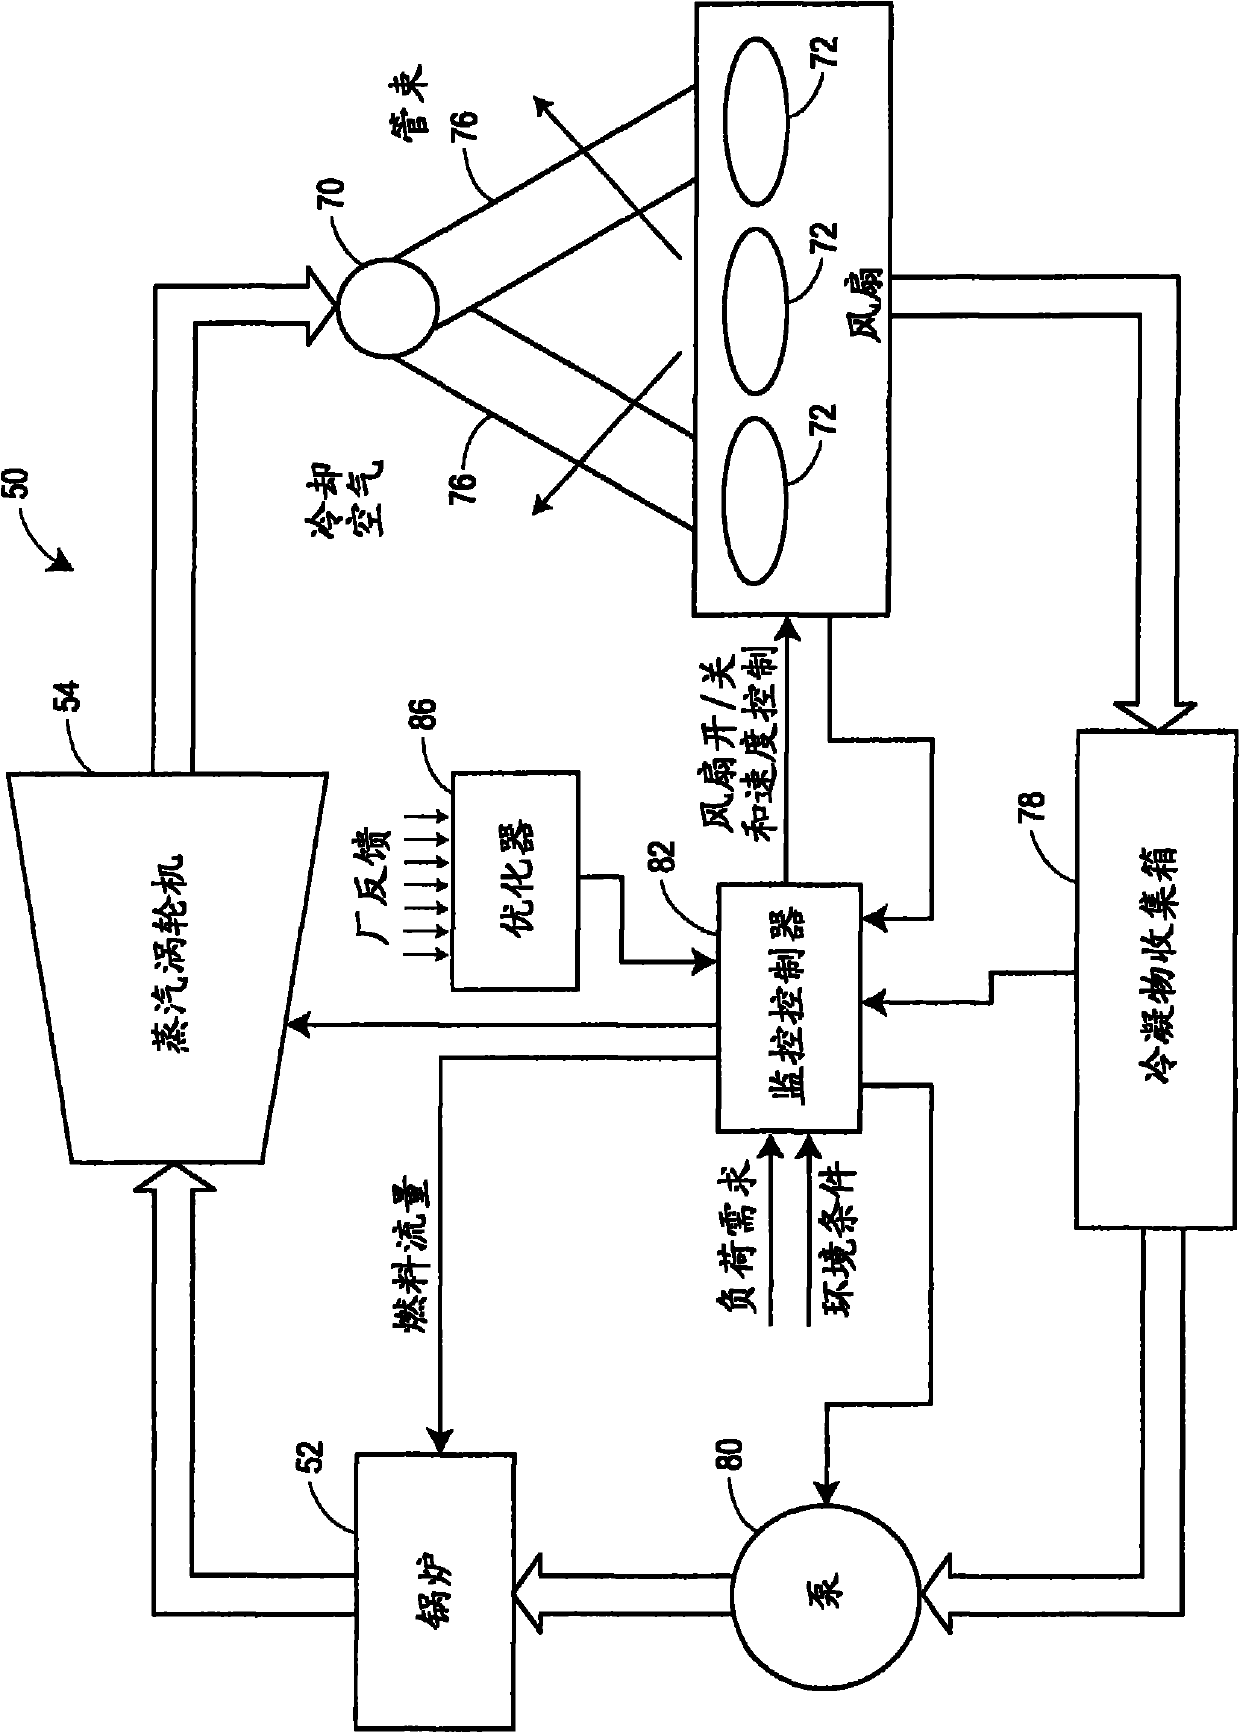 Optimized control of power plants having air cooled condensers